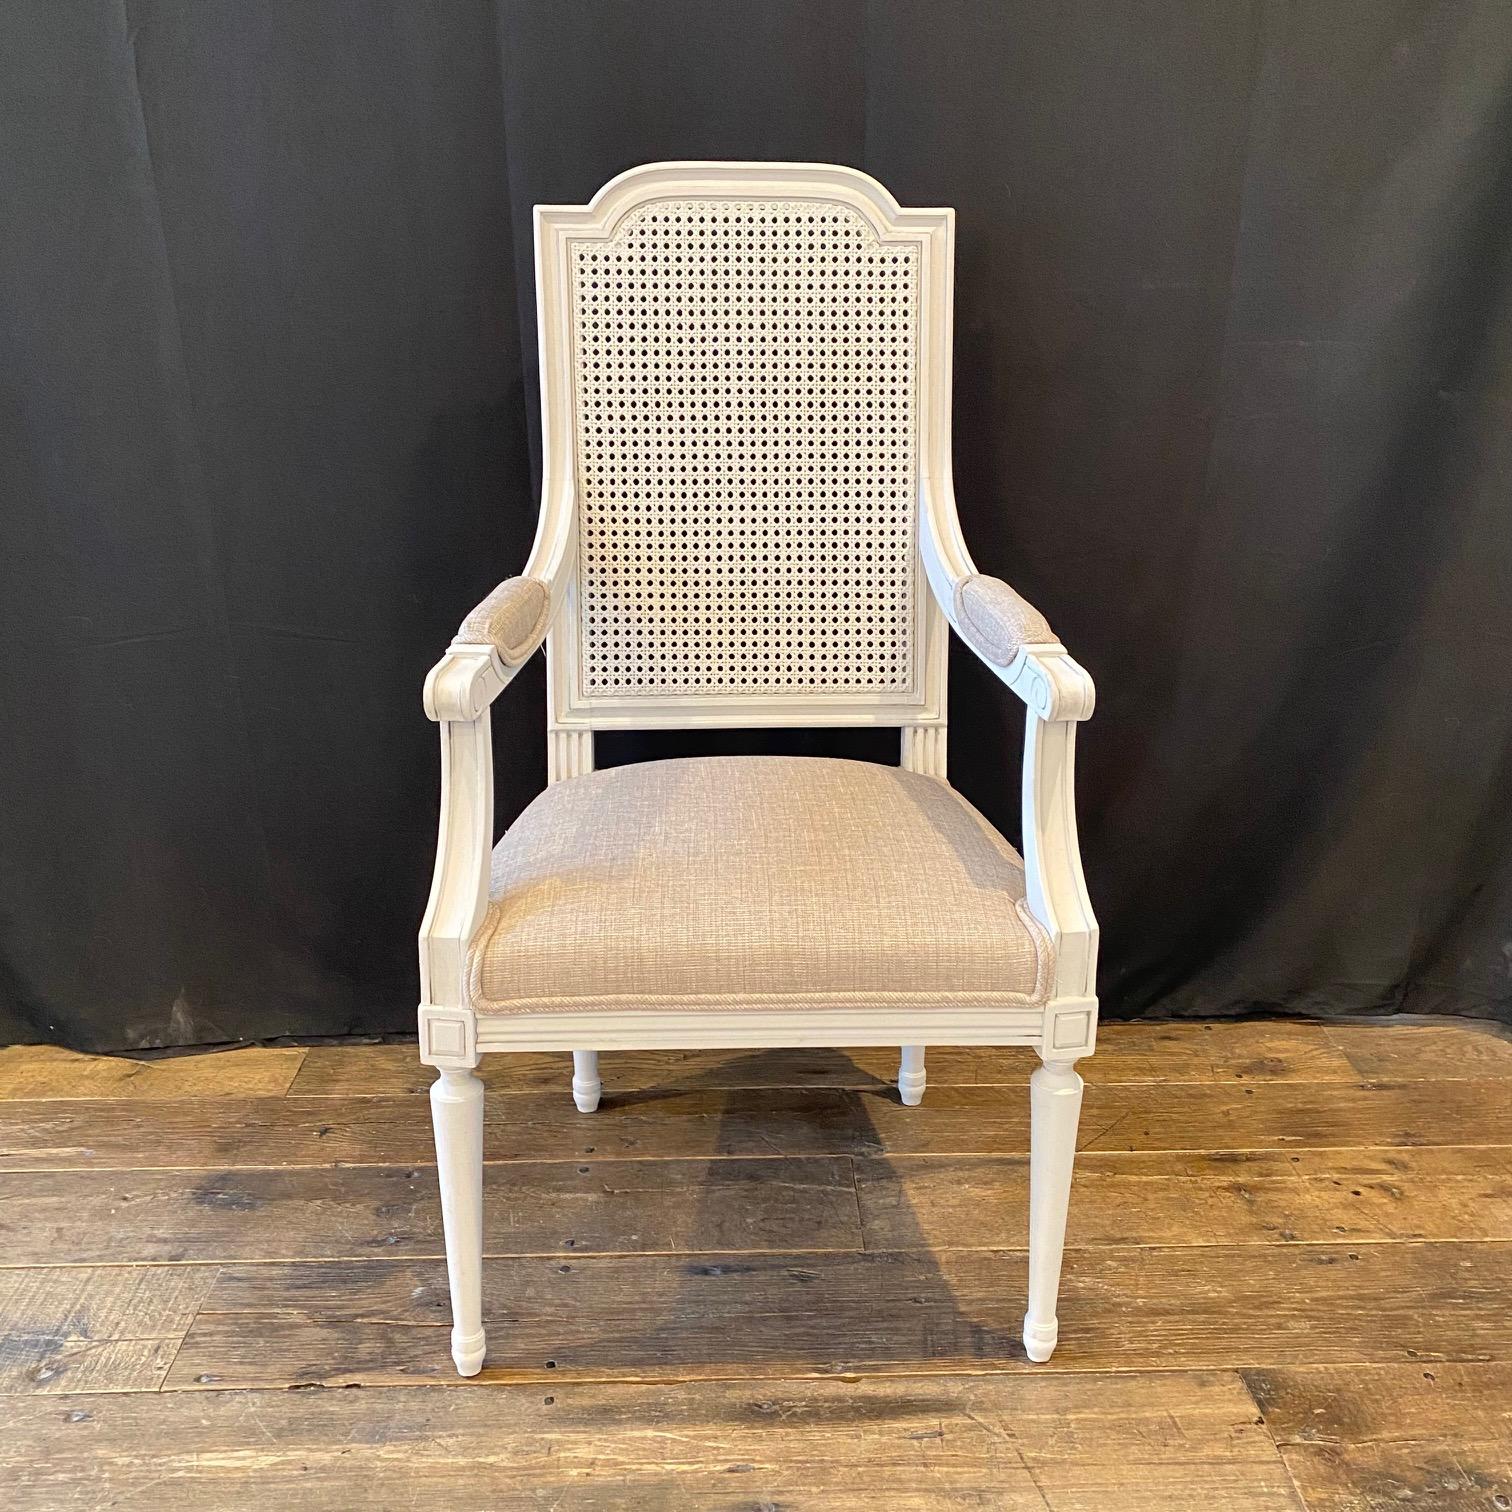 Really lovely Louis XVI armchairs bought in Lyon, France. Sturdy with caning, all in great condition. New upholstery. 
#5866

Measure: H arm 27”.